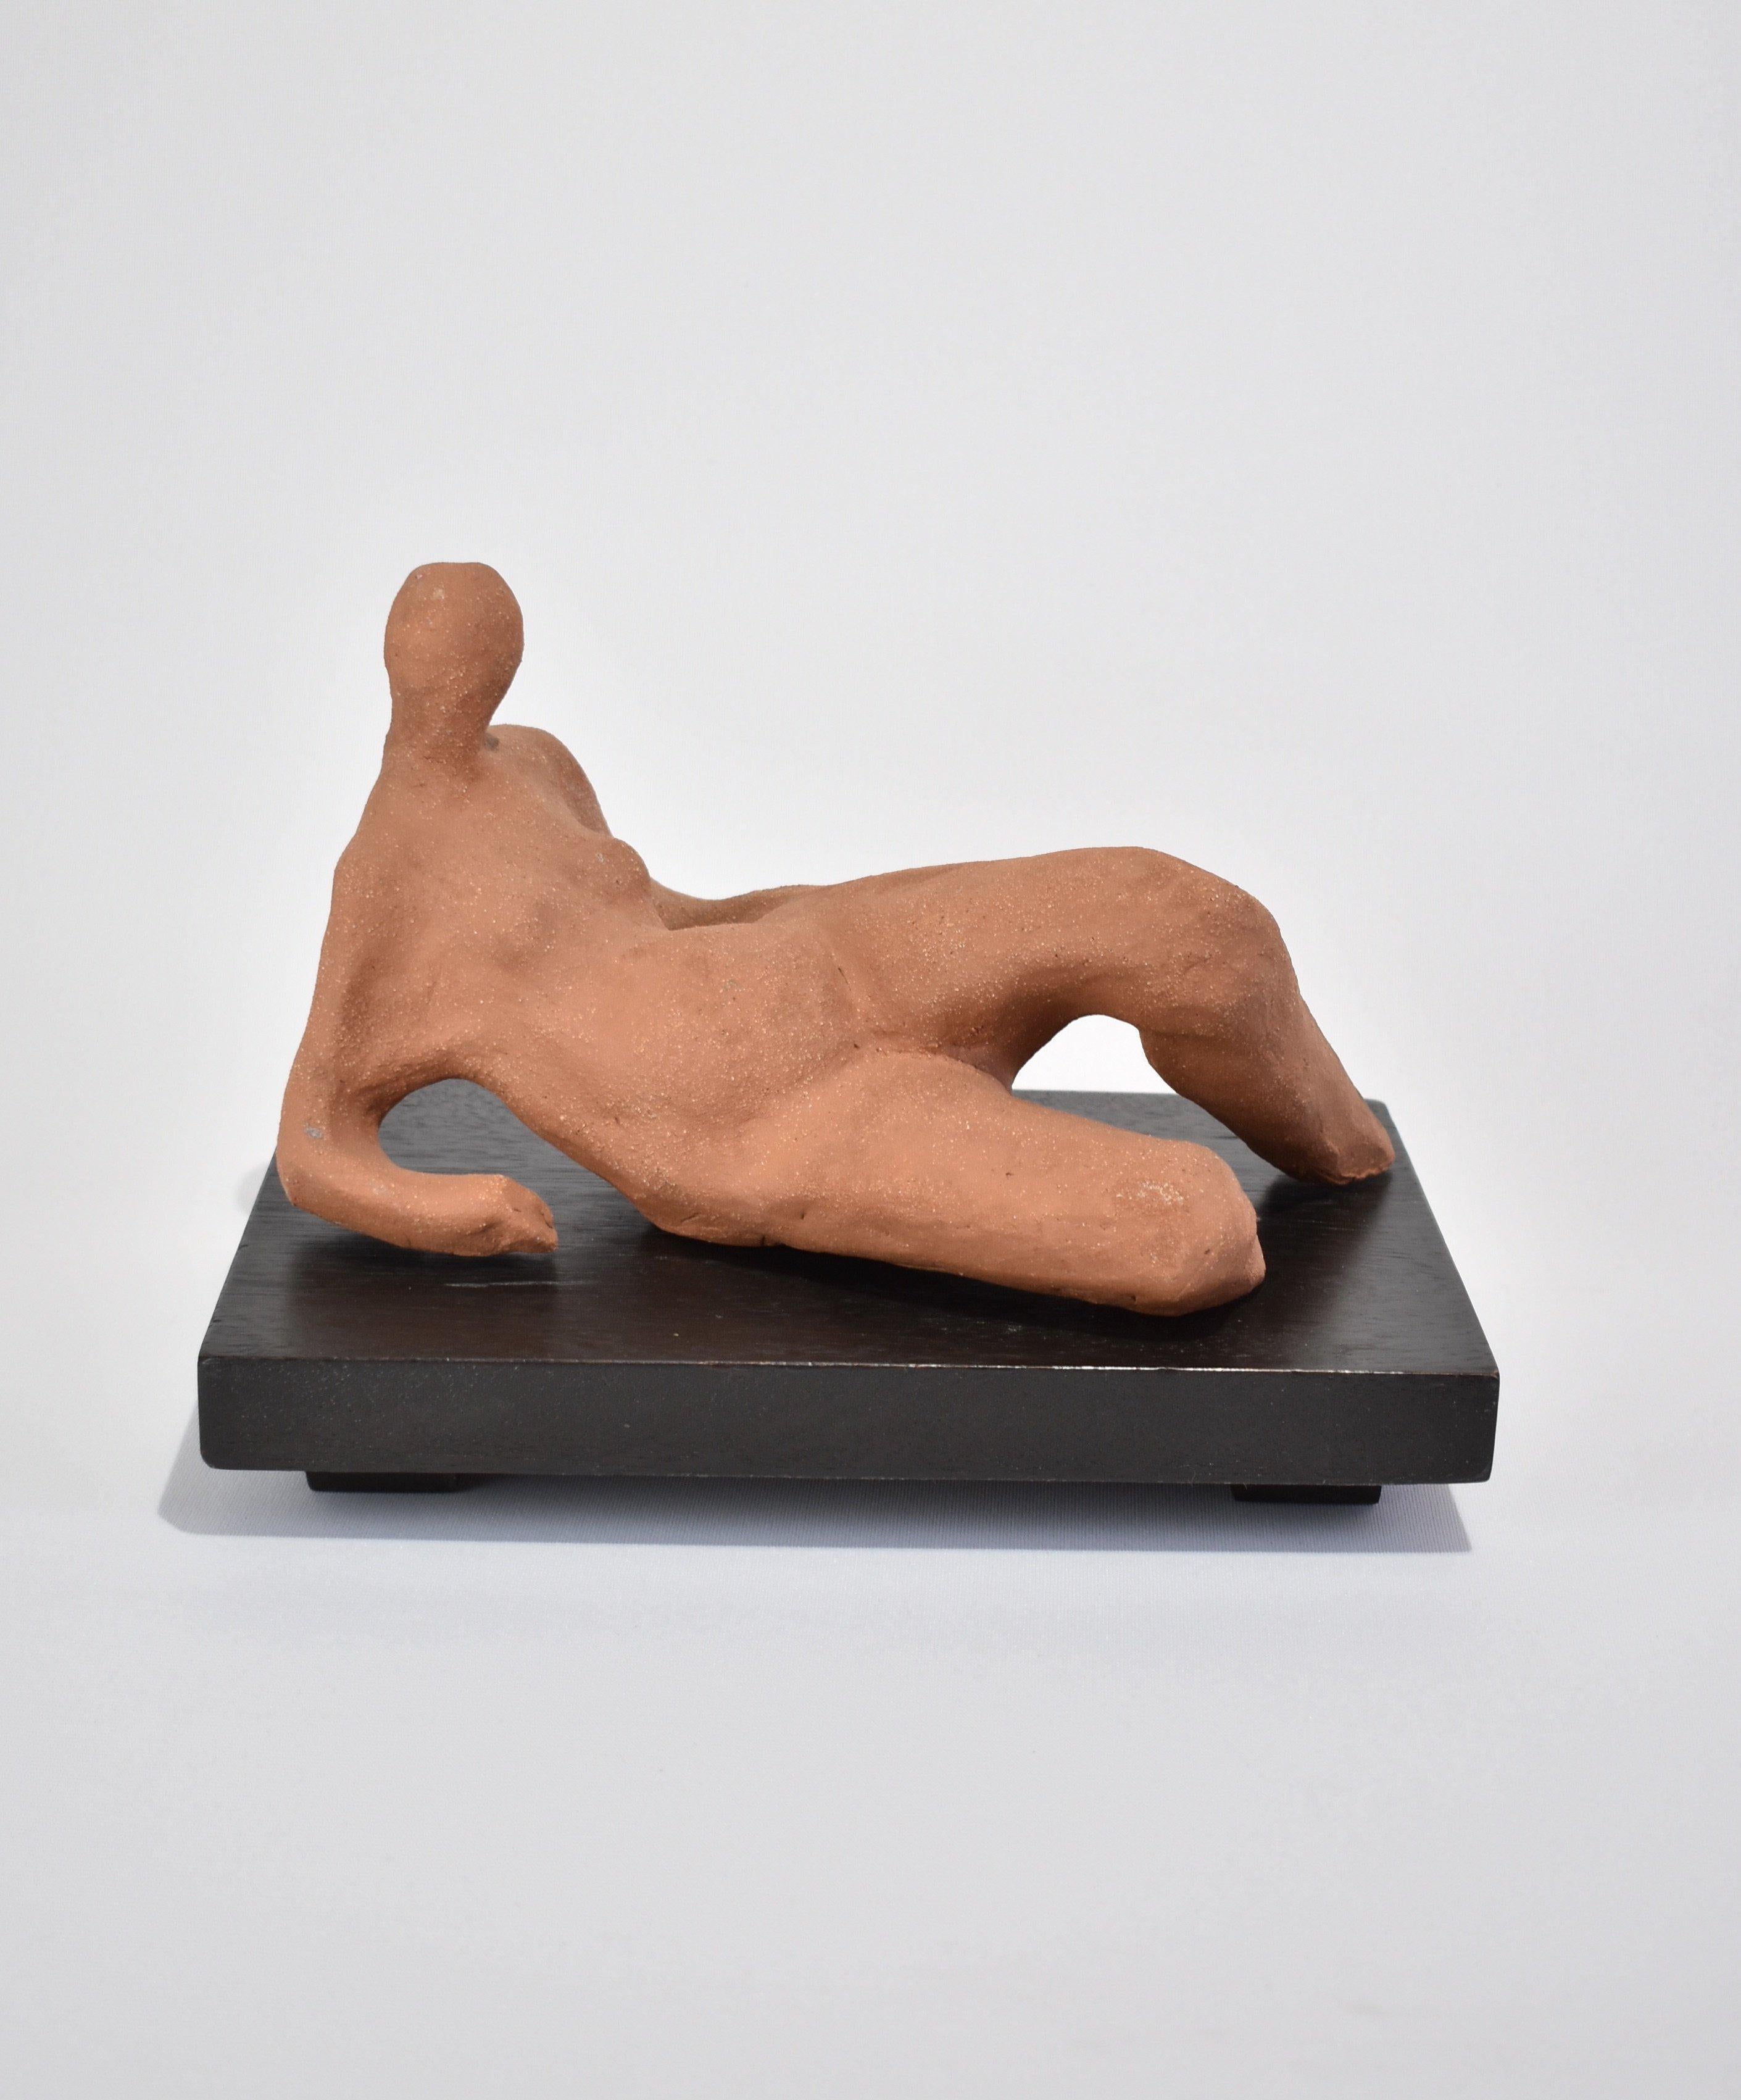 Stunning, terracotta figure sculpture on a detached black wooden base. Illegibly signed and dated on base. Reminiscent of Henry Moore's Reclining Figures.

Dimensions:
Sculpture, 11